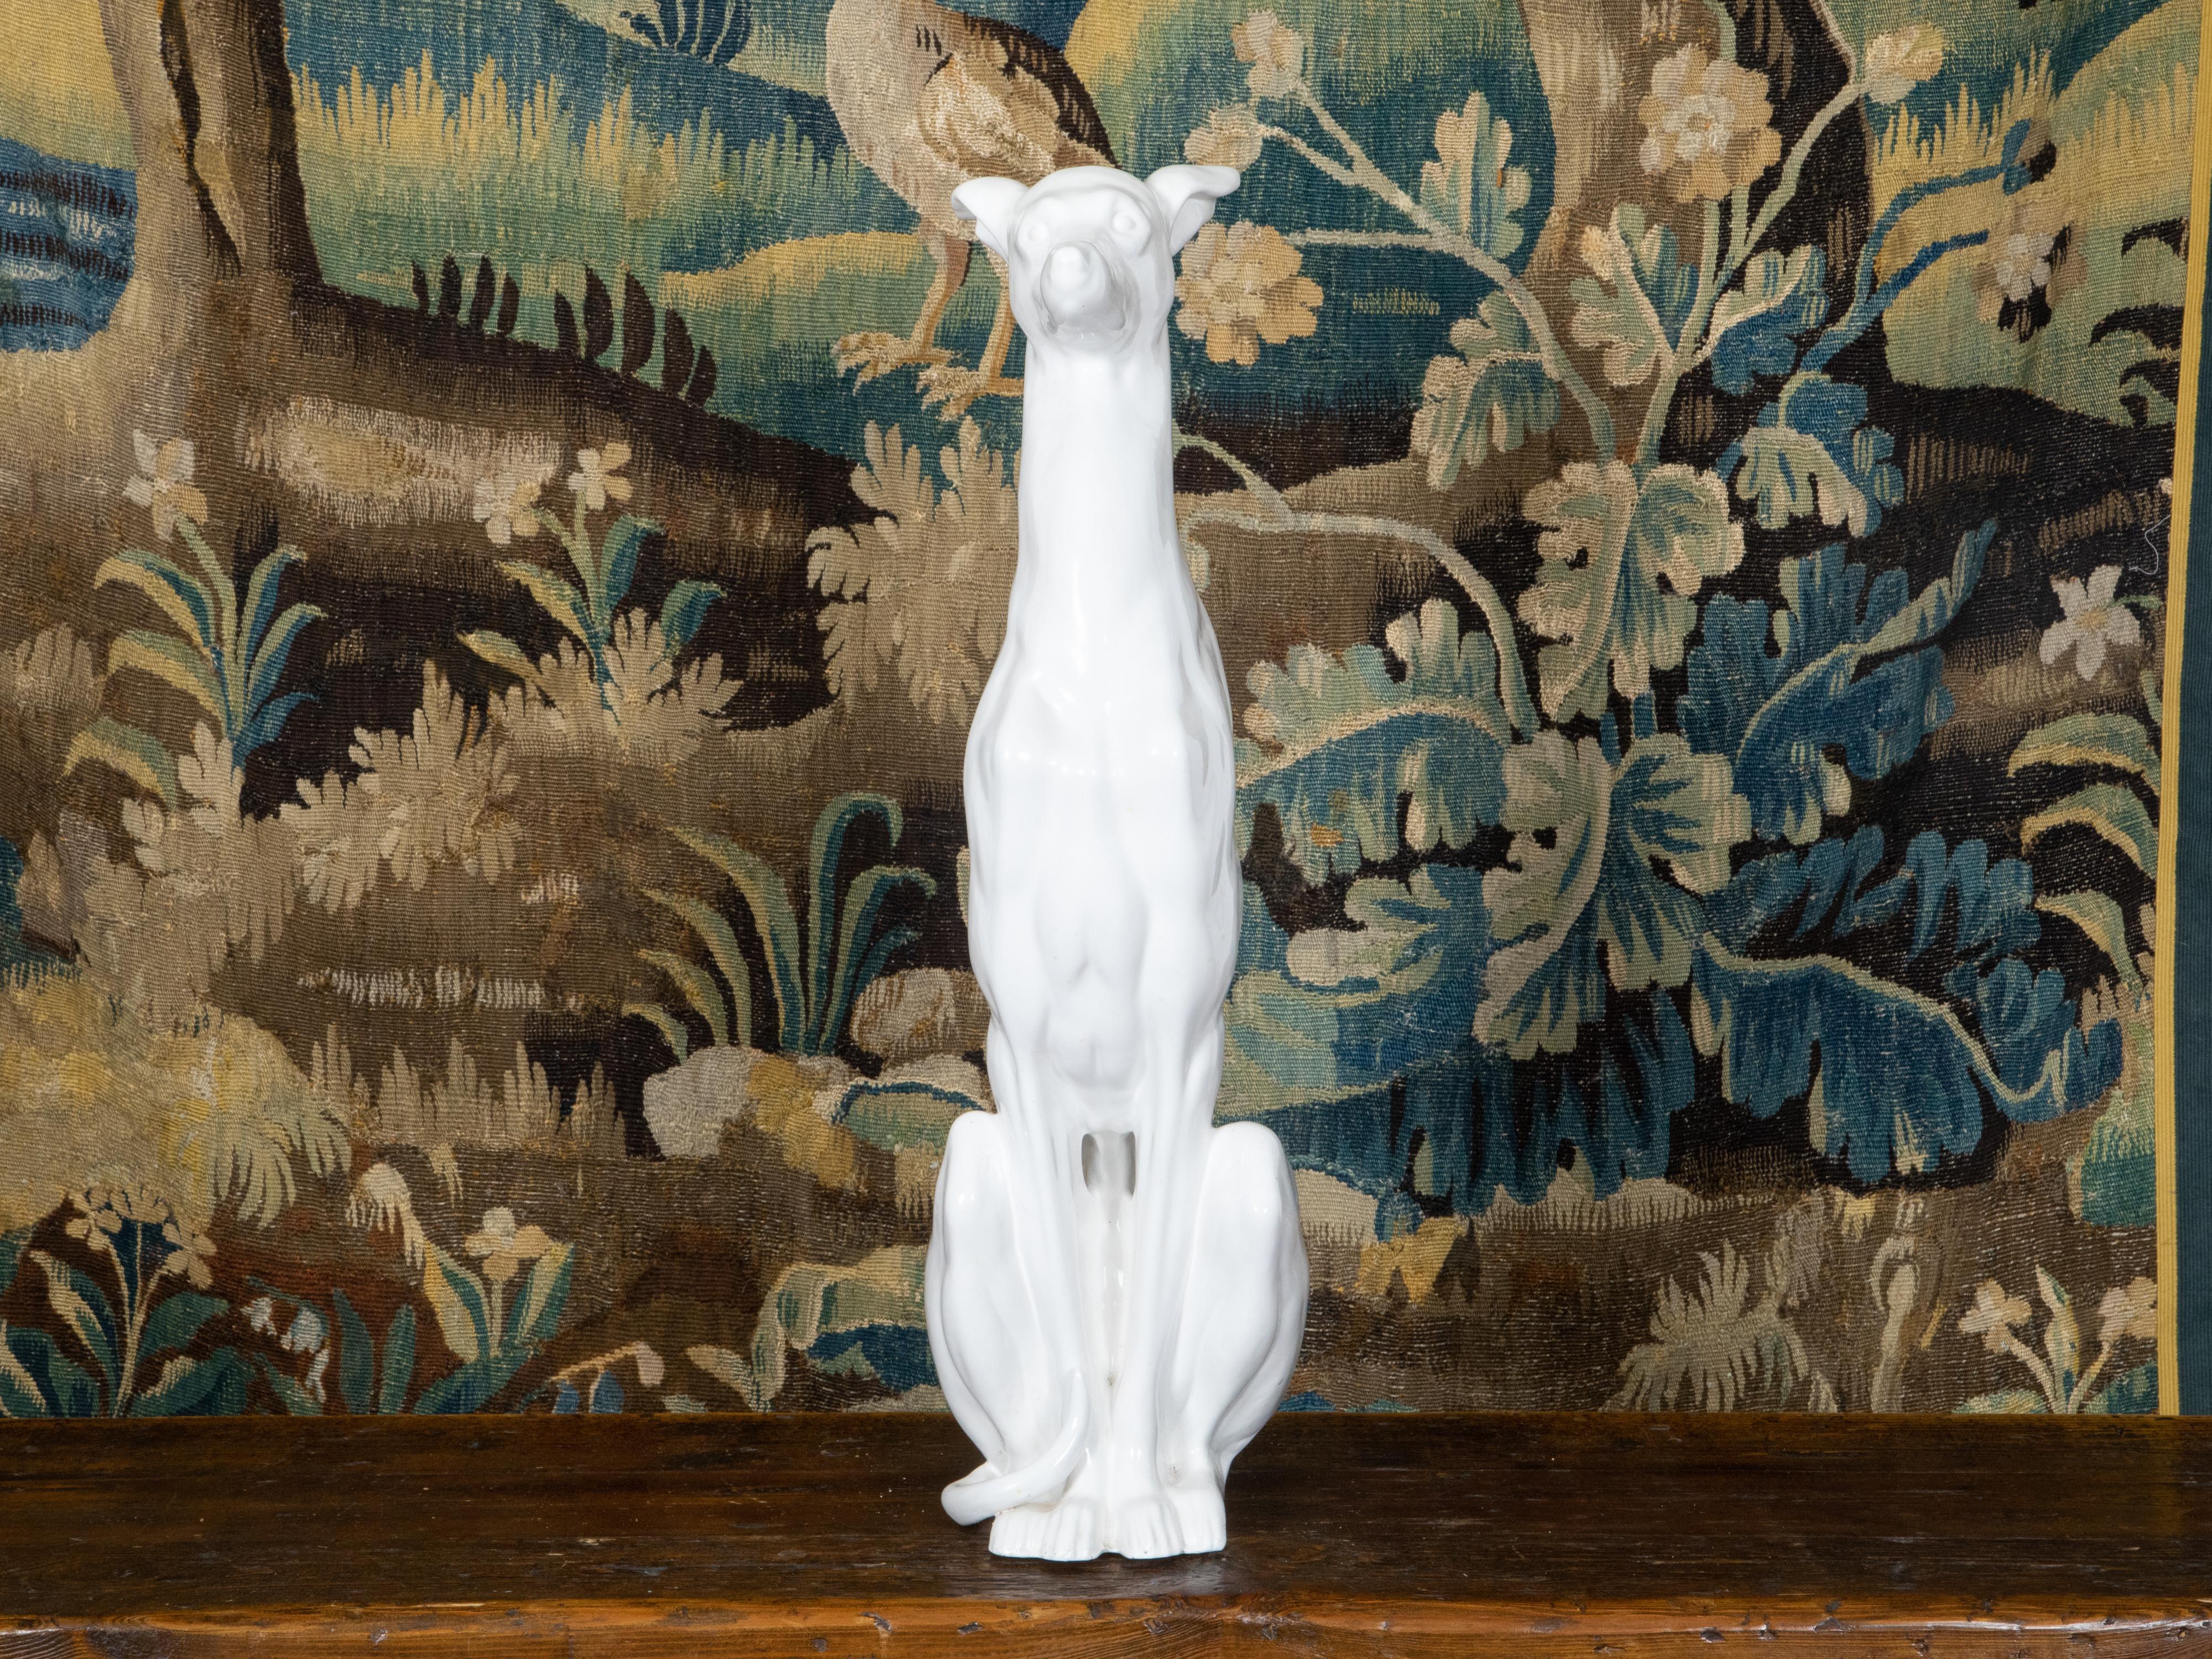 A vintage Italian white porcelain dog sculpture from the Mid-20th Century depicting a greyhound obediently sitting on his hind legs. Created in Italy during the Midcentury period, this porcelain sculpture draws our attention with its handsome